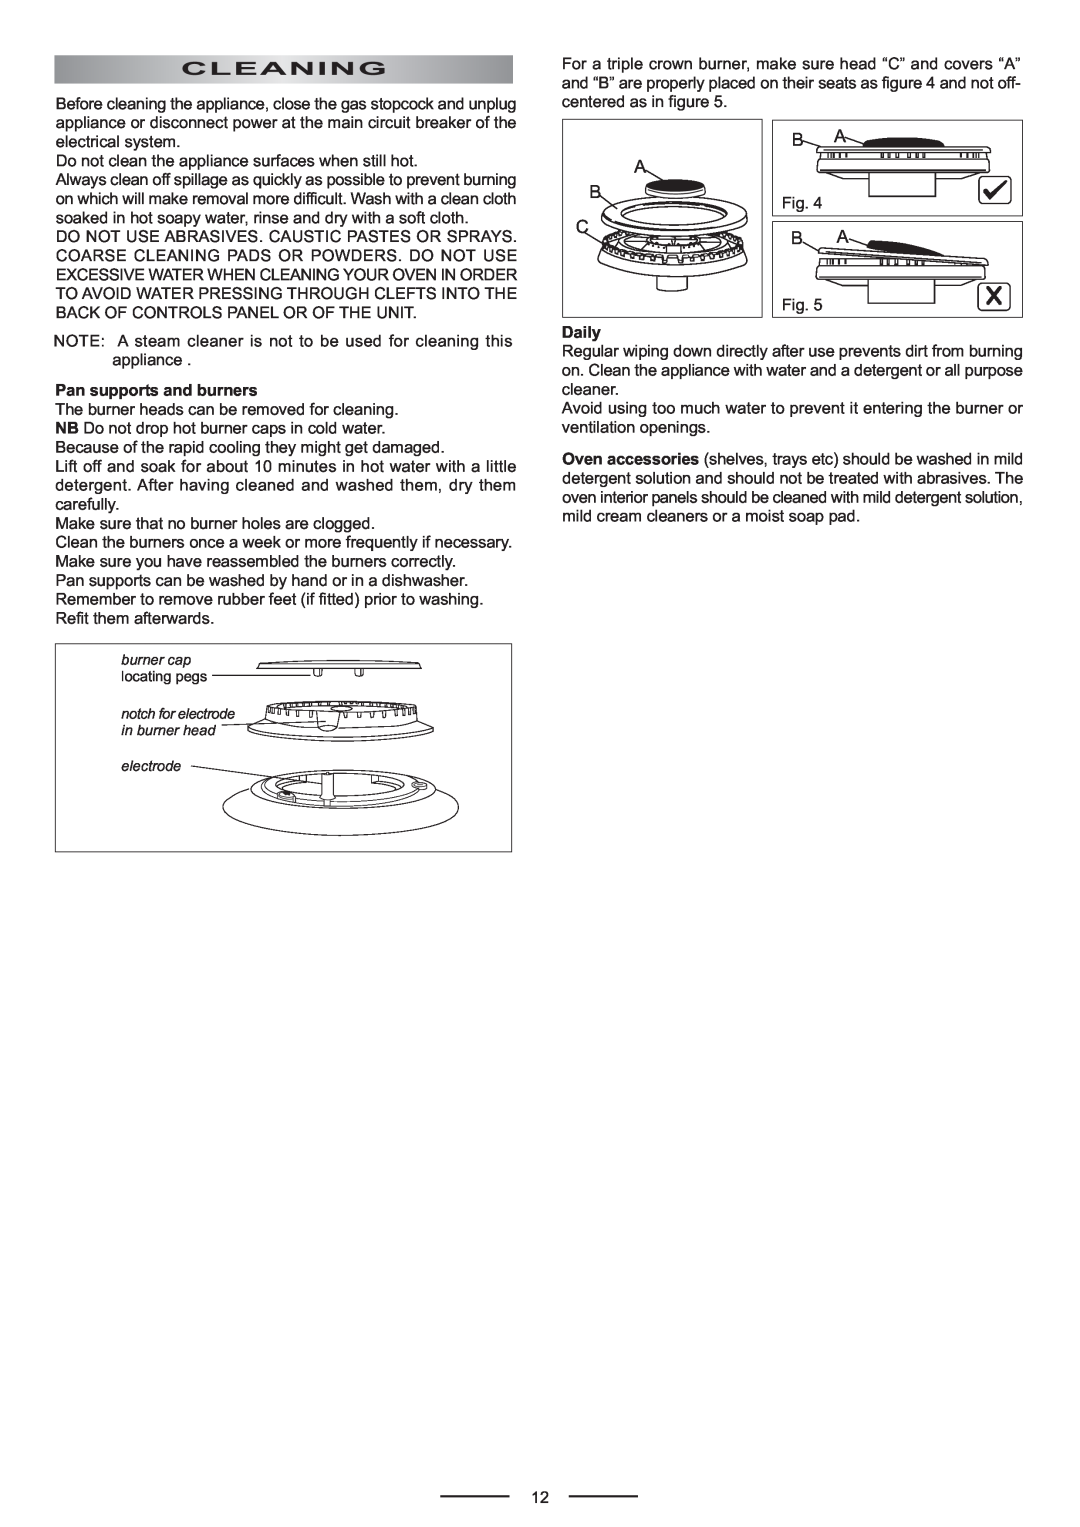 Whirlpool ACG902IX manual Cleaning, Pan supports and burners, Daily 